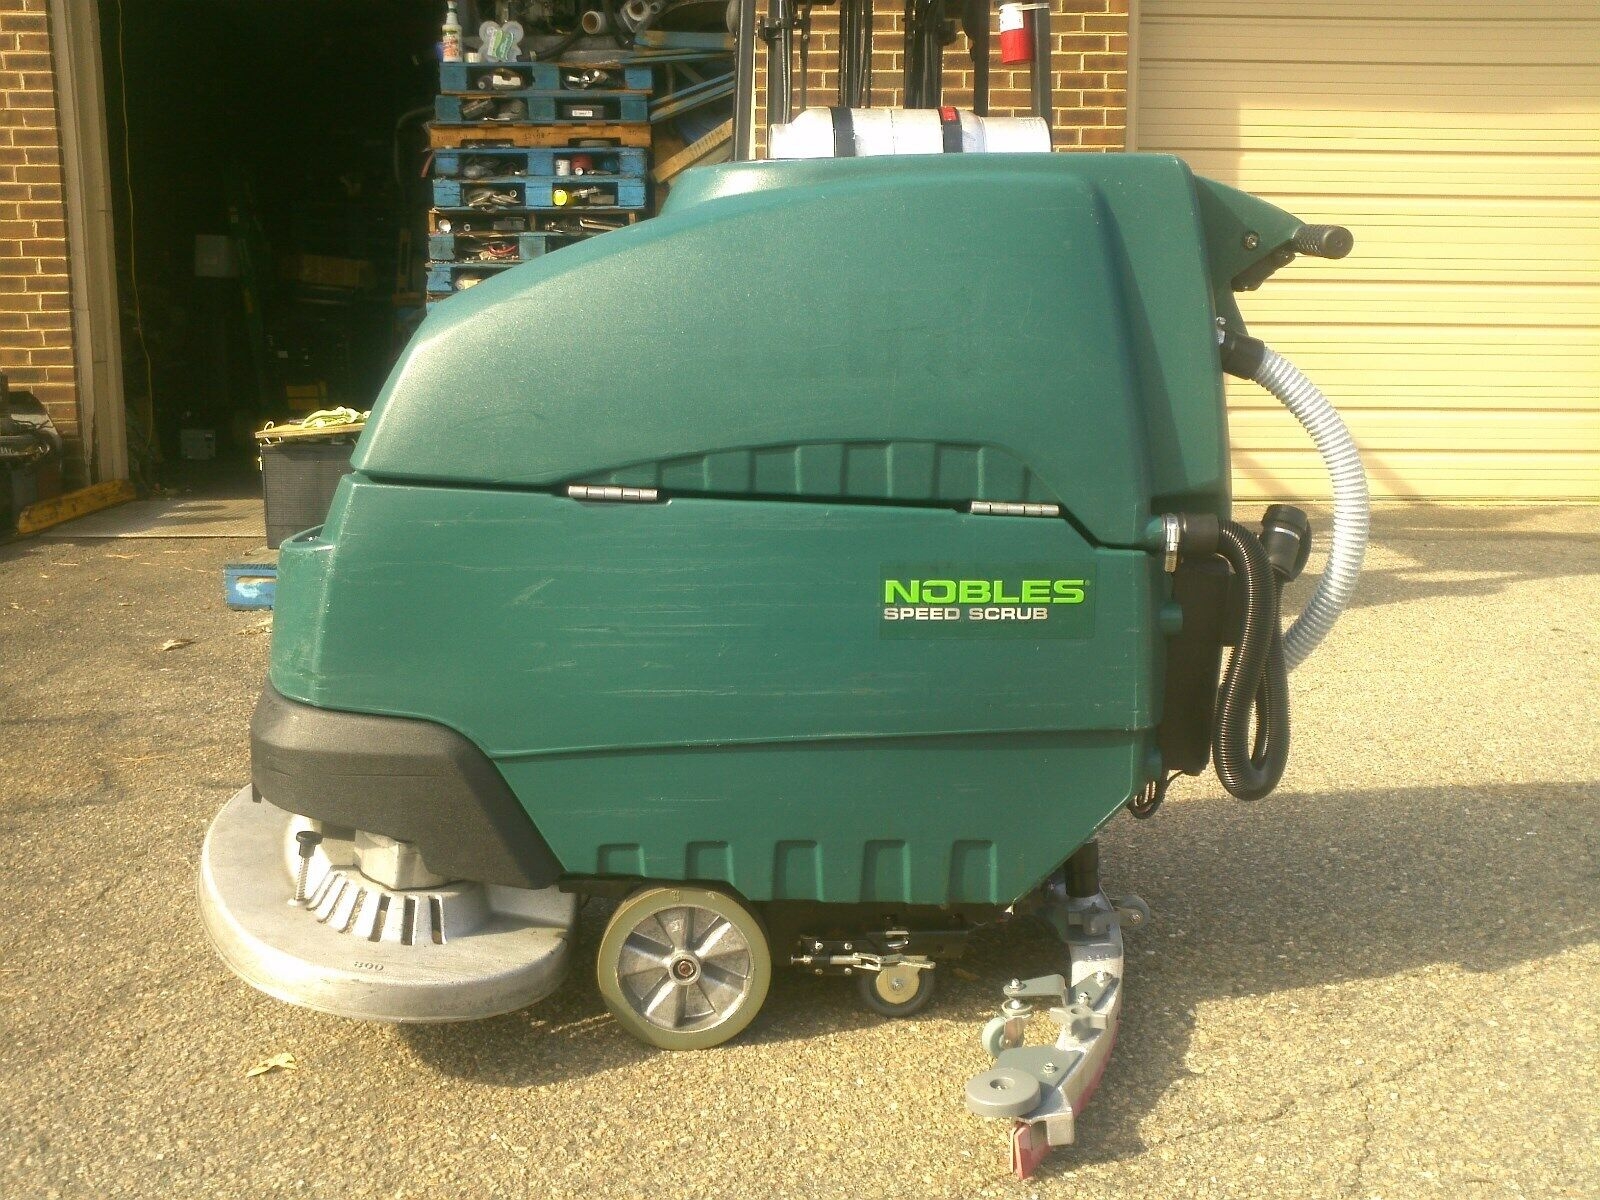 Clean virtually any hard surface condition to maximize return on investment with a wide range of cleaning options and configurations. Make battery maintenance safer with the new optional automatic battery watering system. The reliable Speed Scrub 500 Walk-Behind Scrubber provides the right solution for your application with its versatile design, easy-to-use controls, and durable components.